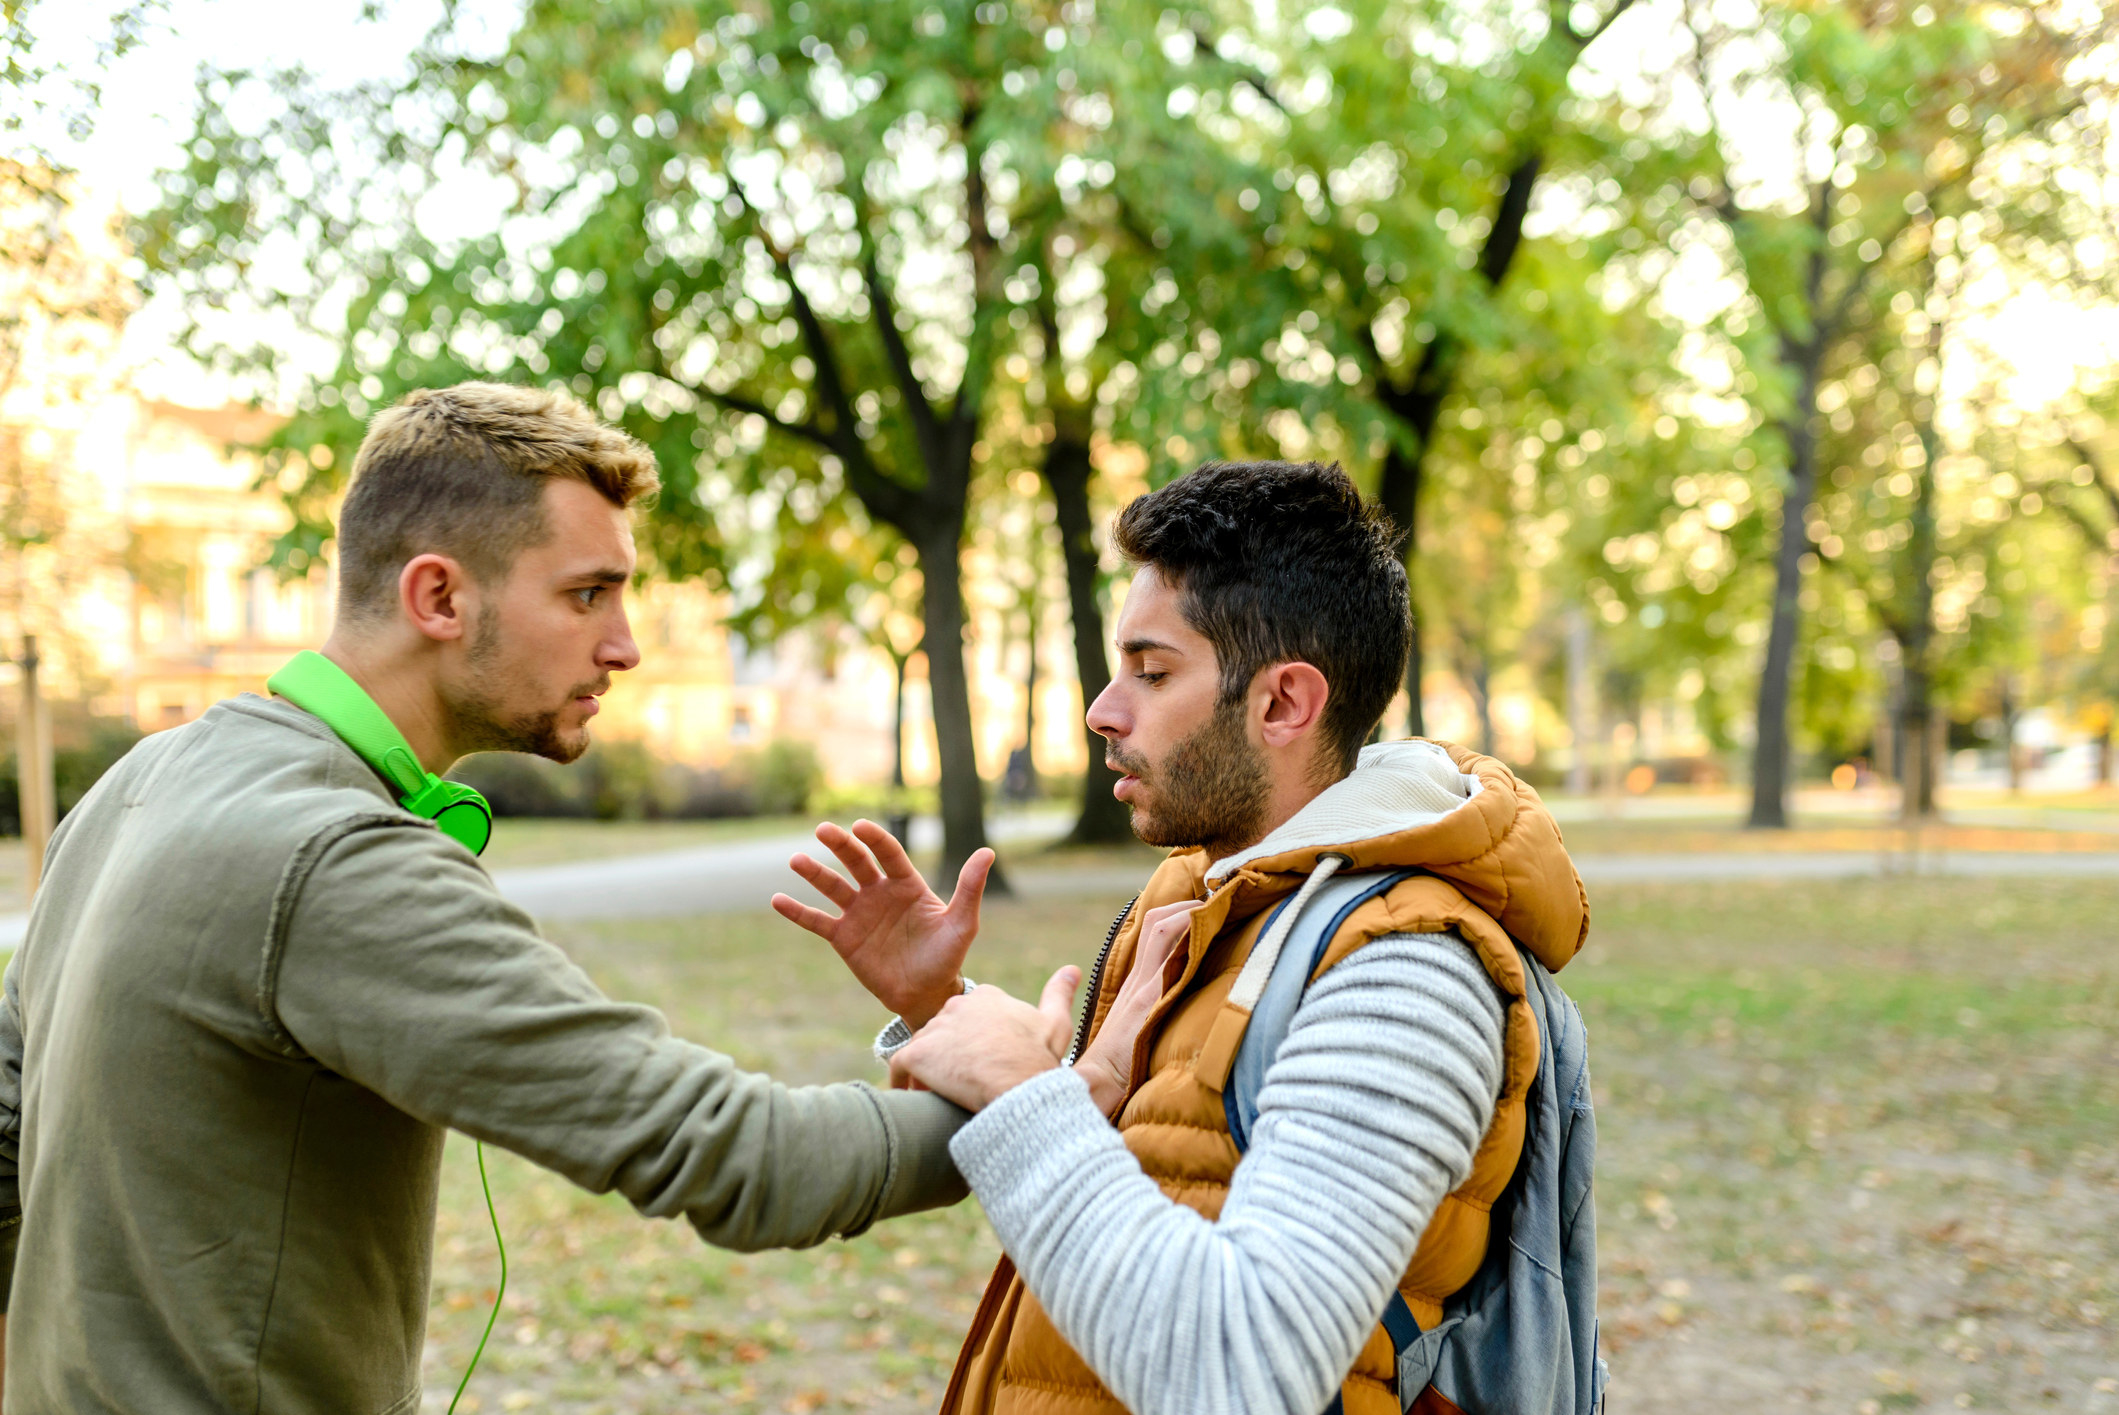 Two men arguing in a park